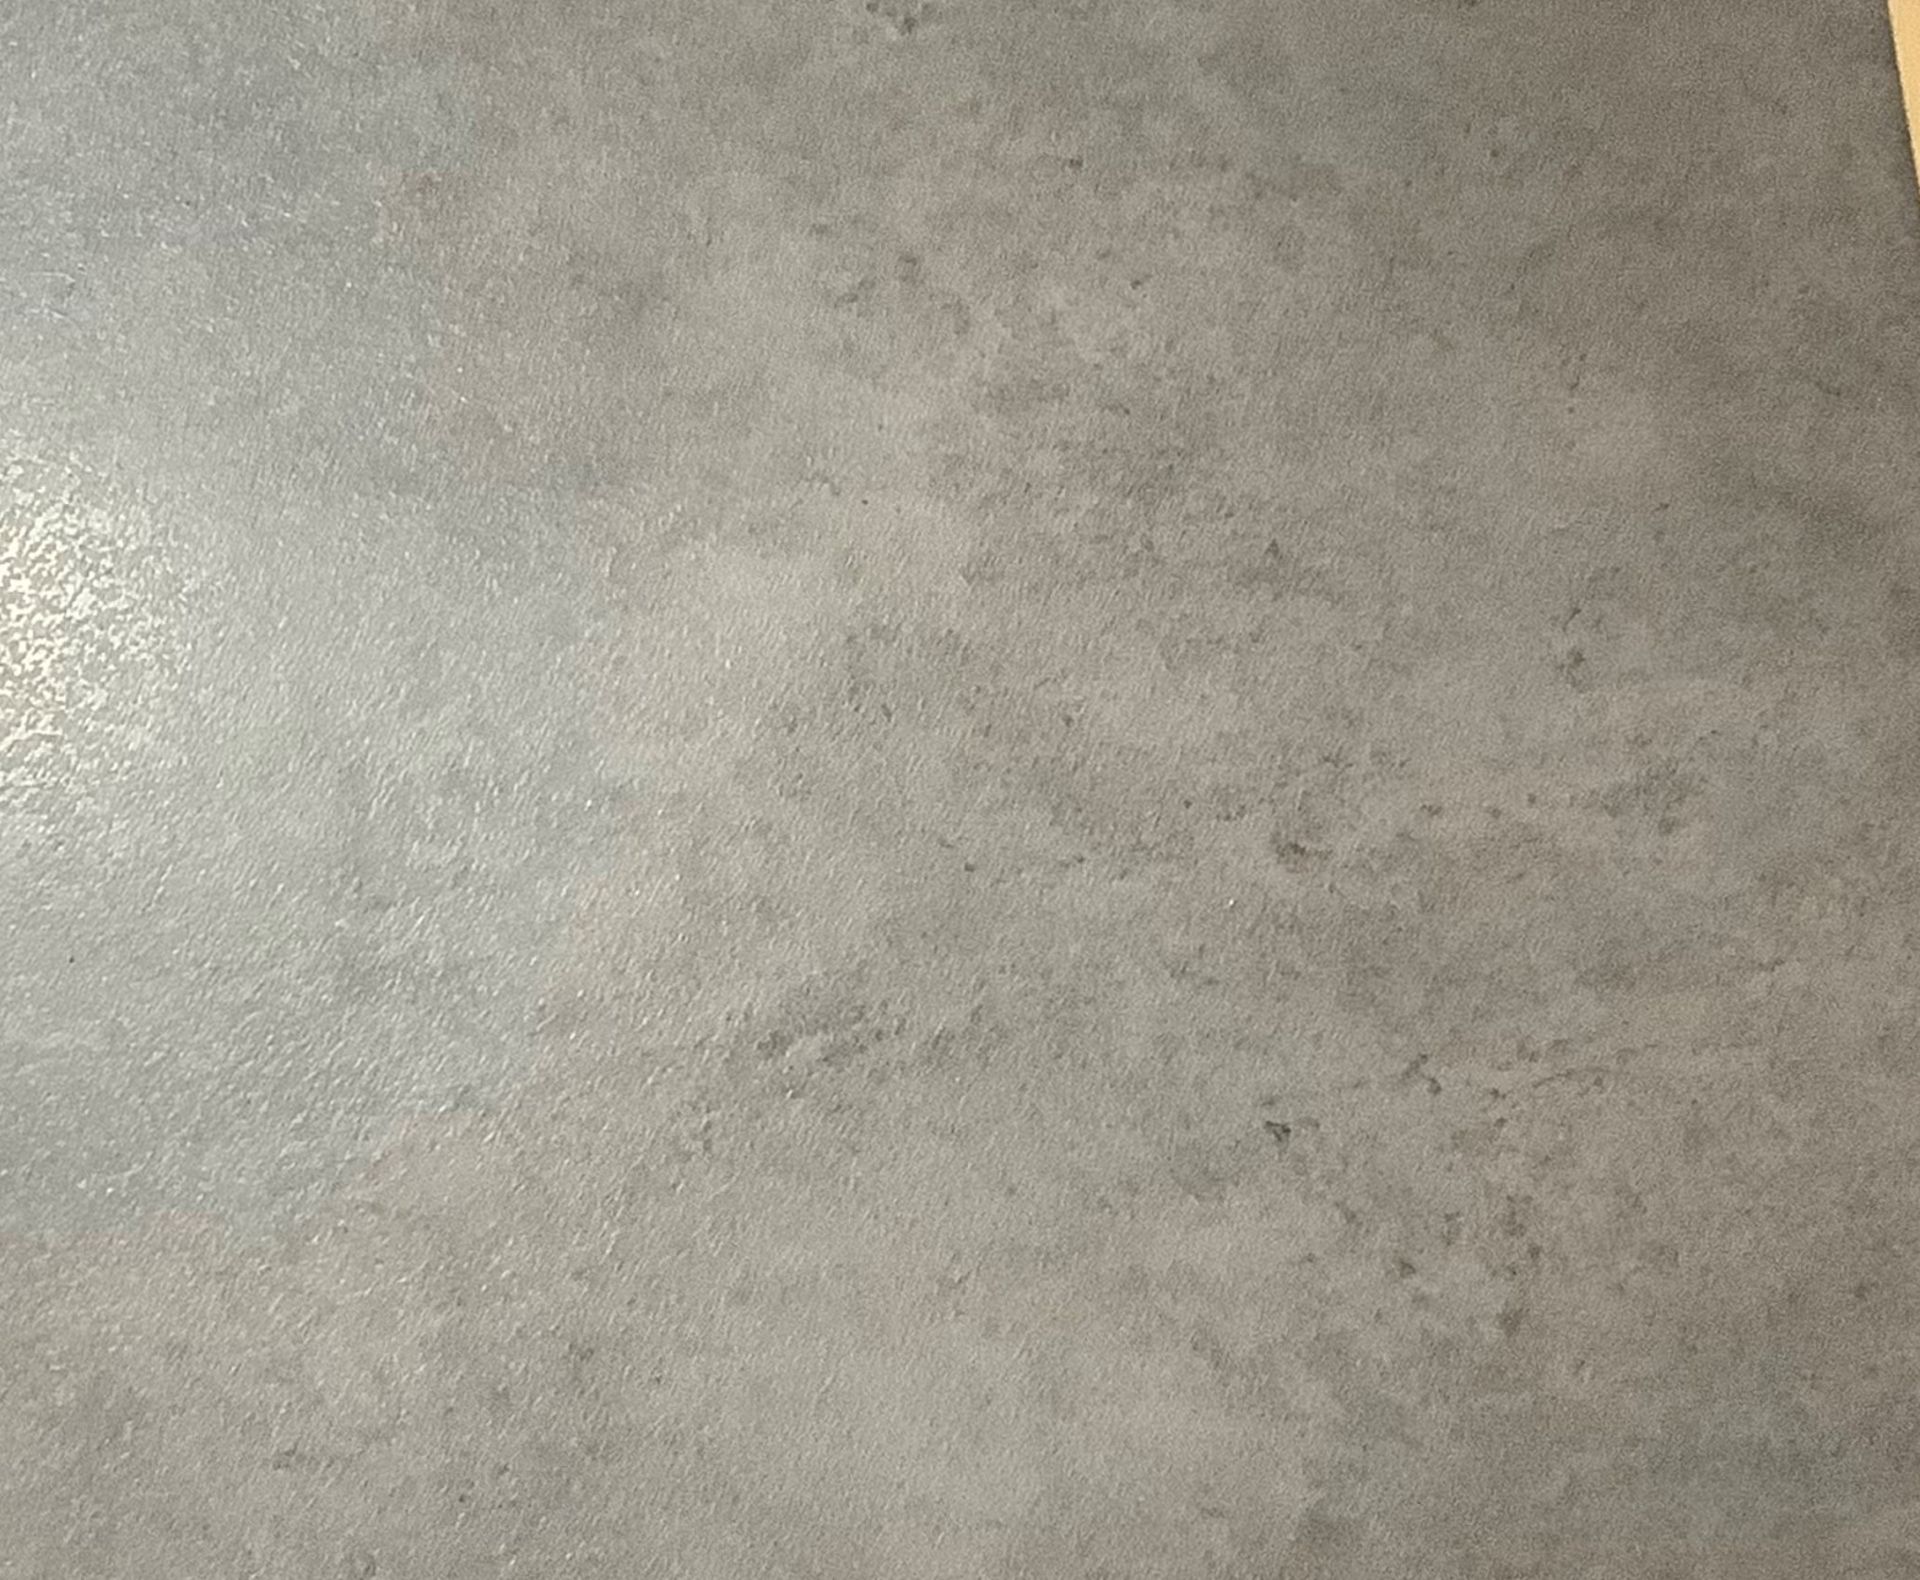 NEW 7.1m2 Porland Marengo Grey Wall and Floor Tiles. 450x450mm Per Tile, 8.8mm Thick. Industria... - Image 3 of 3